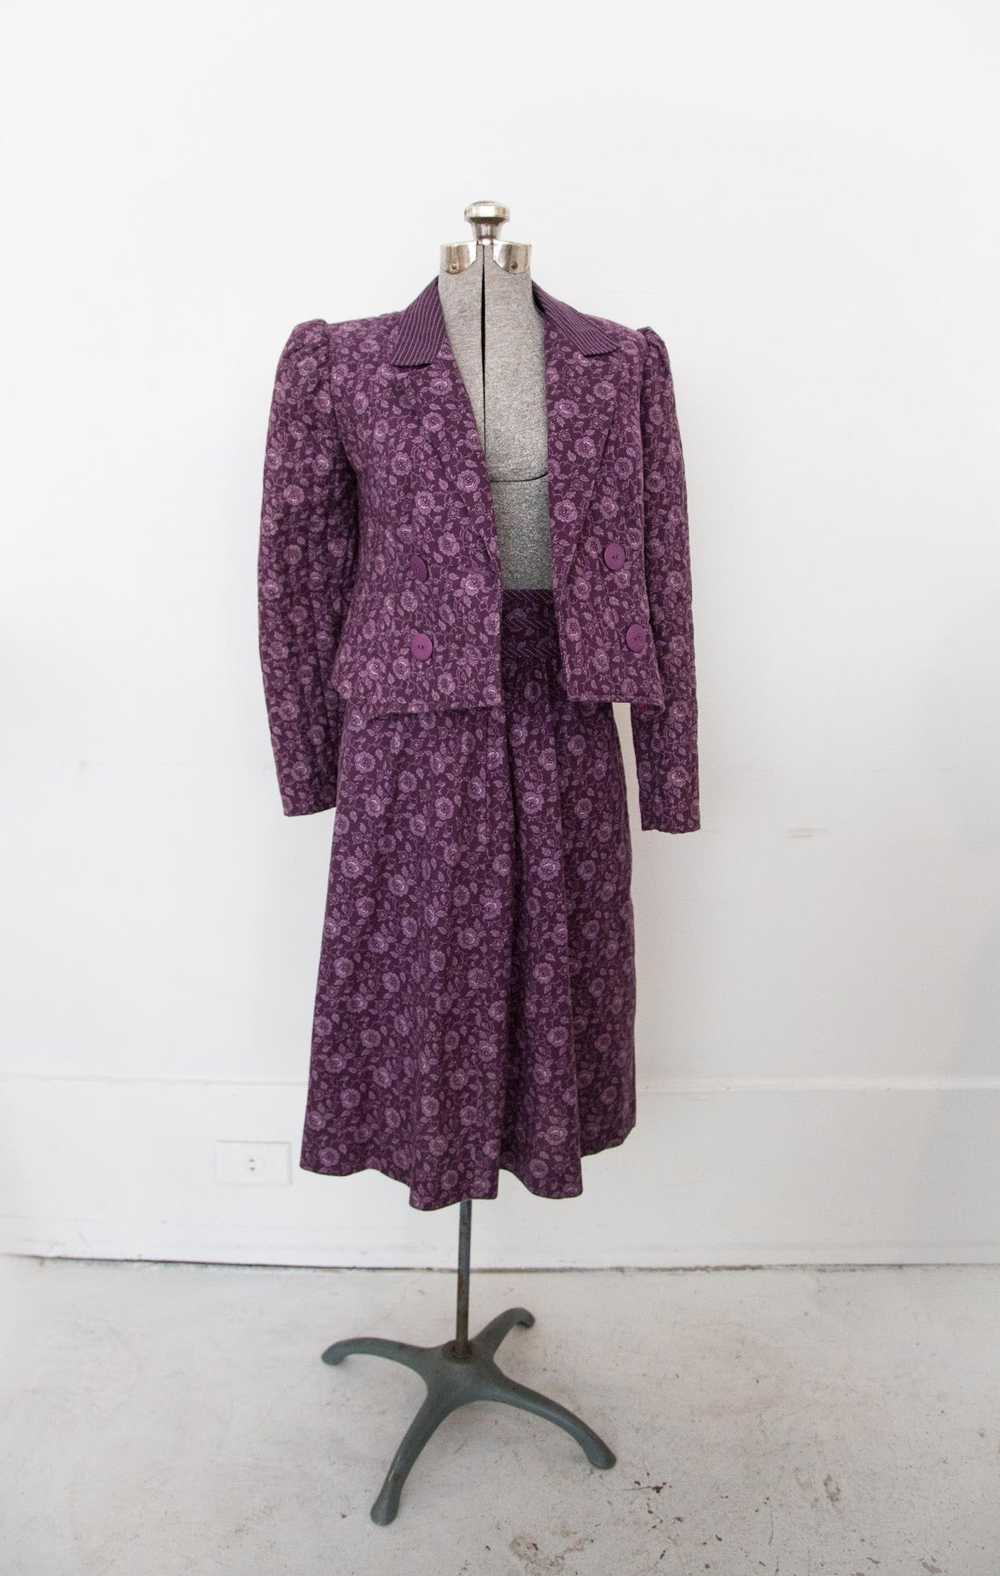 70s Gunne Sax quilted jacket and skirt set - image 2